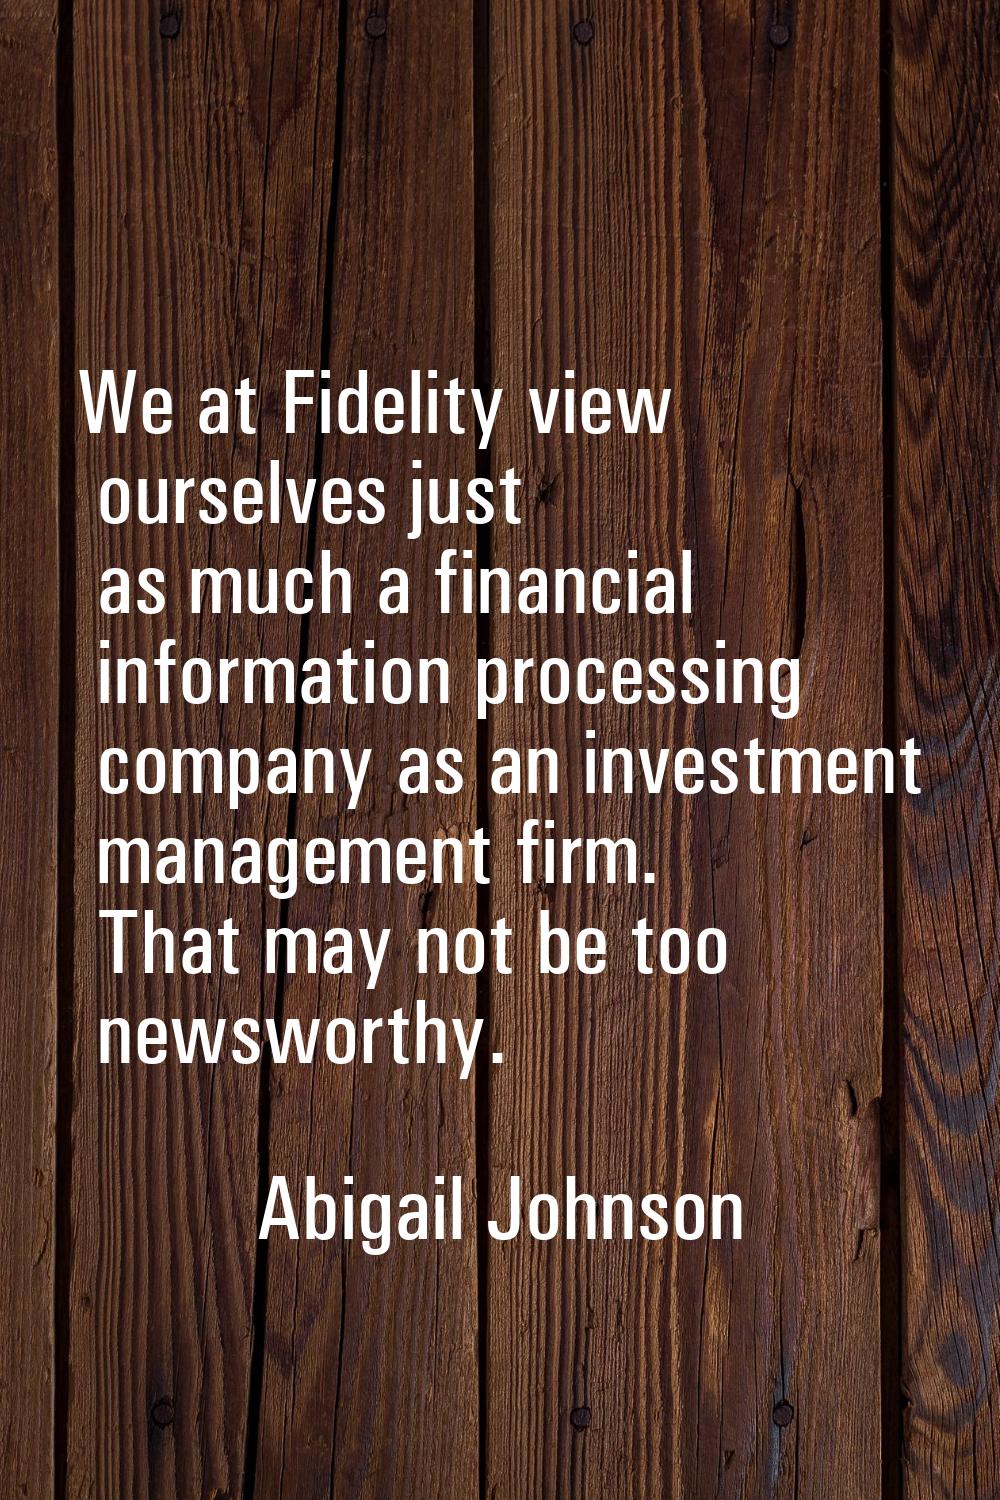 We at Fidelity view ourselves just as much a financial information processing company as an investm